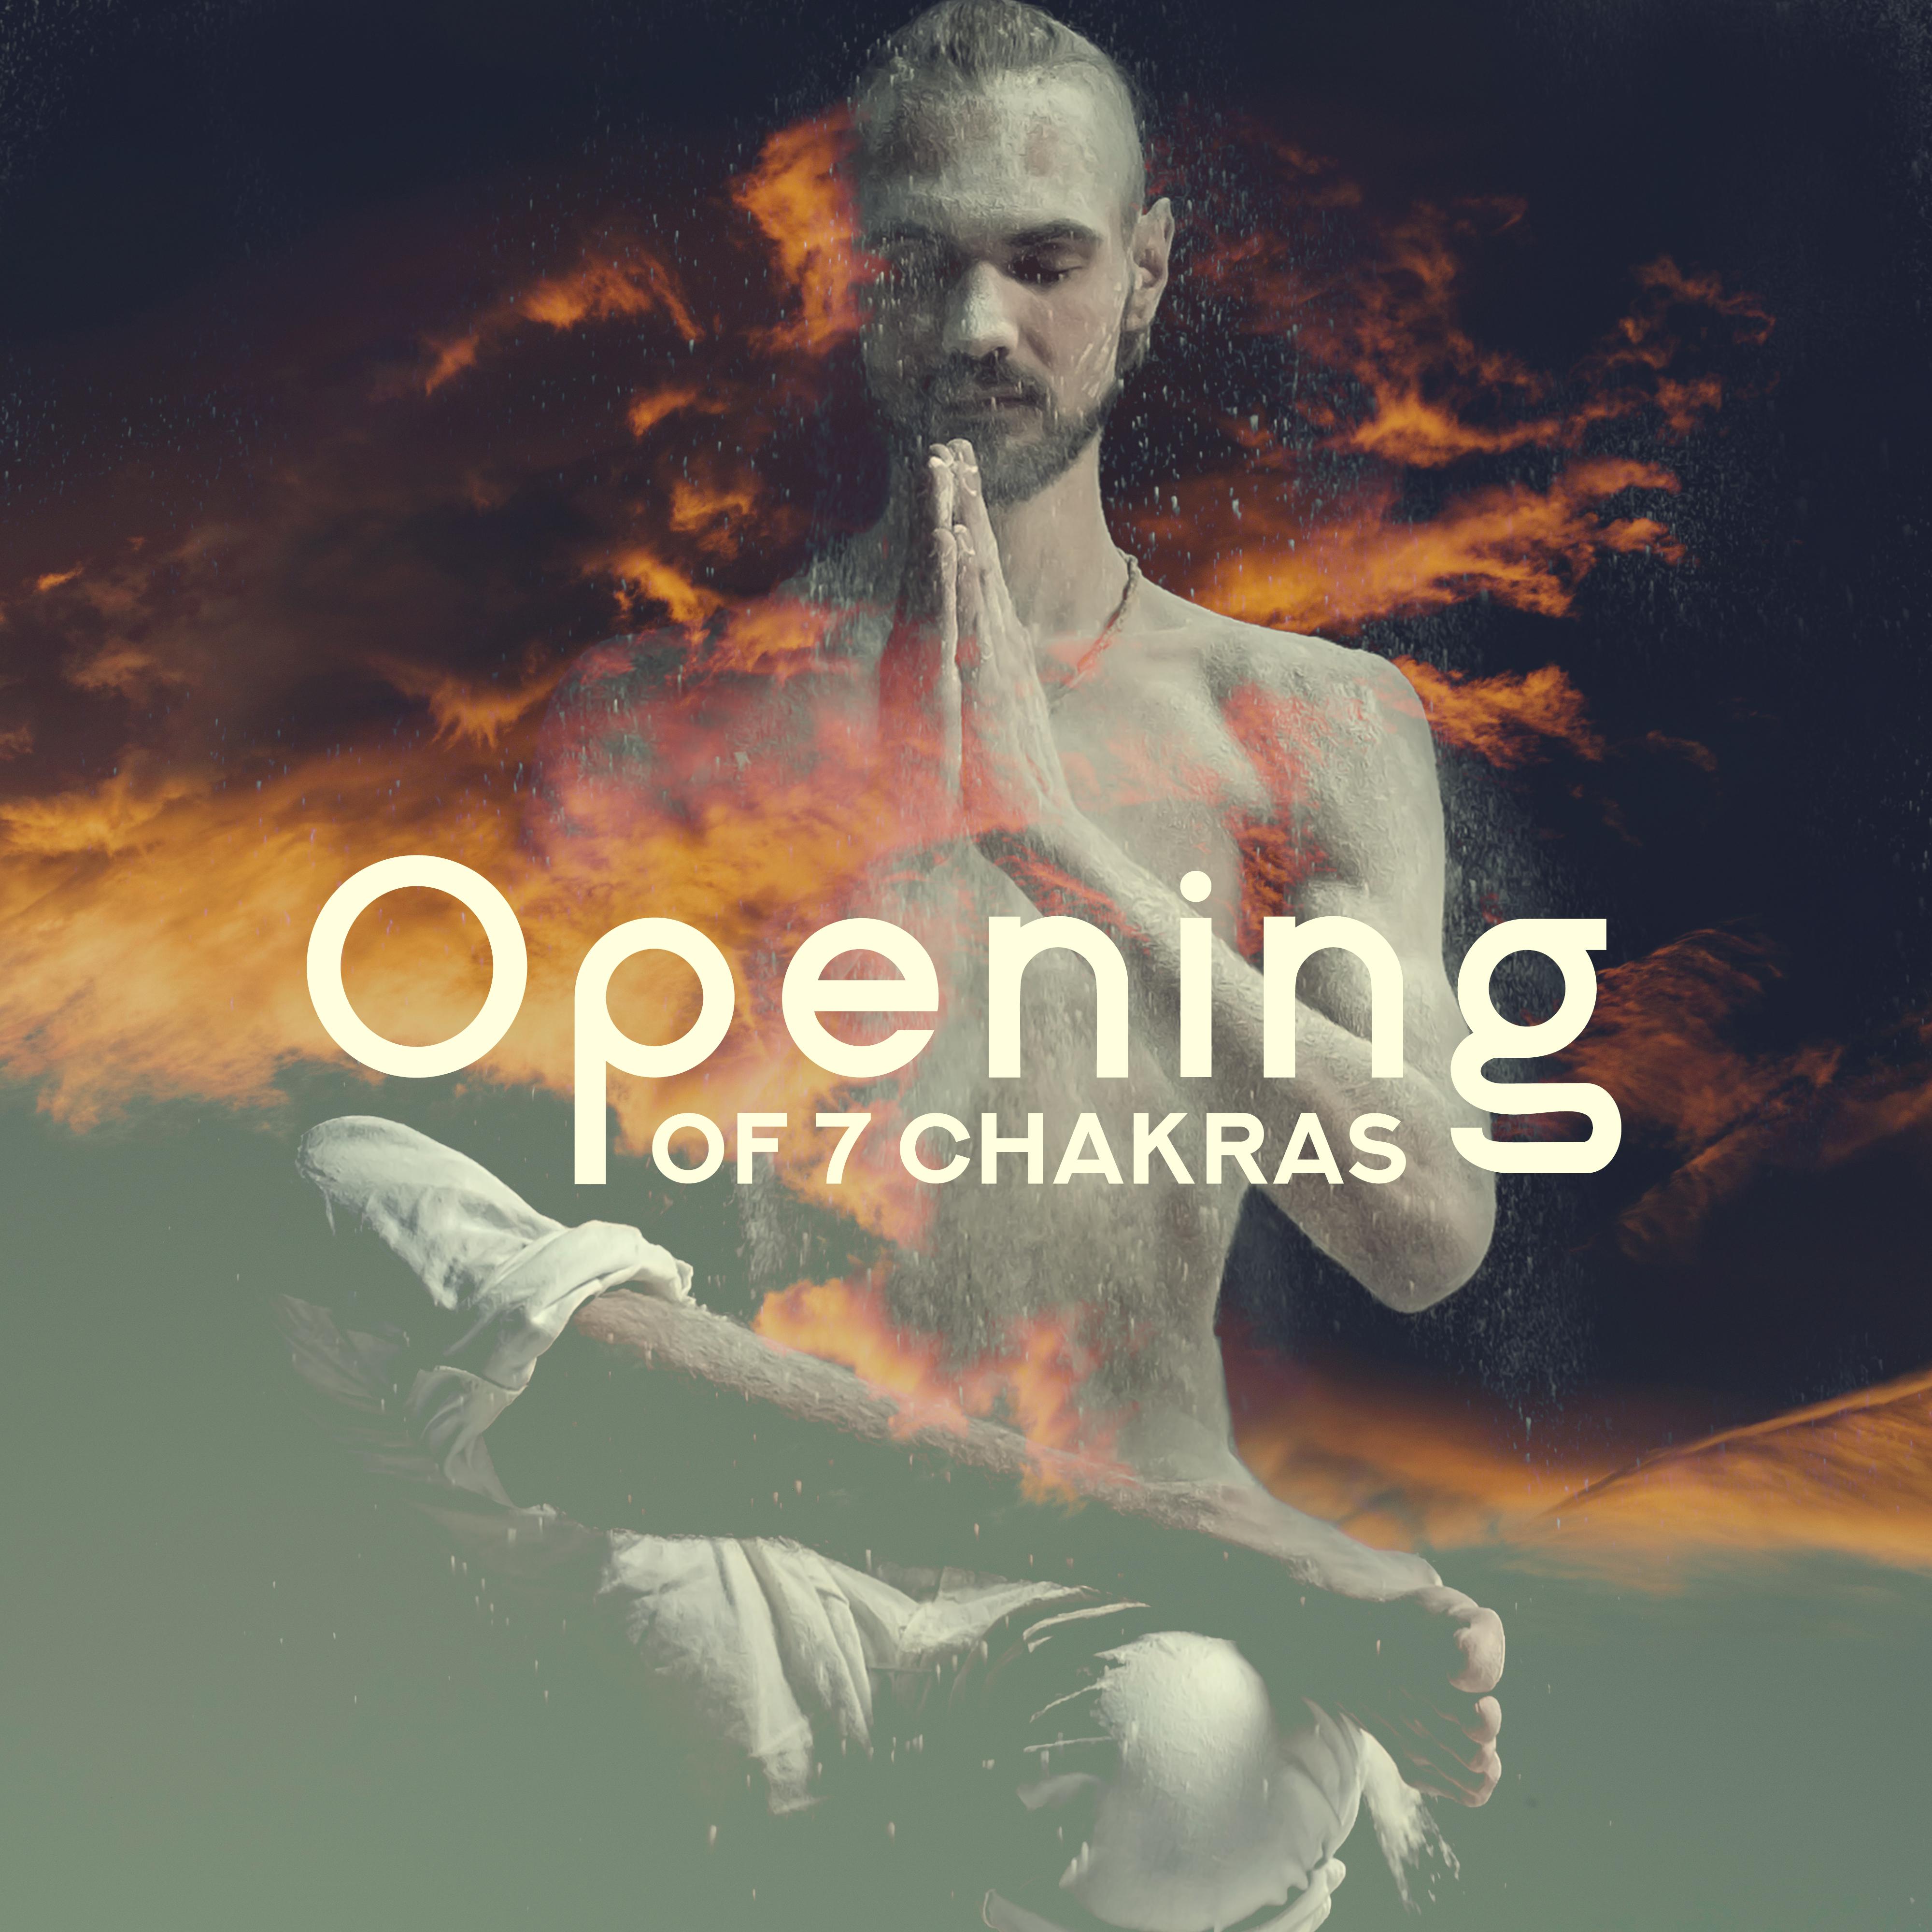 Opening of 7 Chakras - Music Intended for Meditation, Opening, Unblocking, Free Flow of Energy and Purification of Chakras